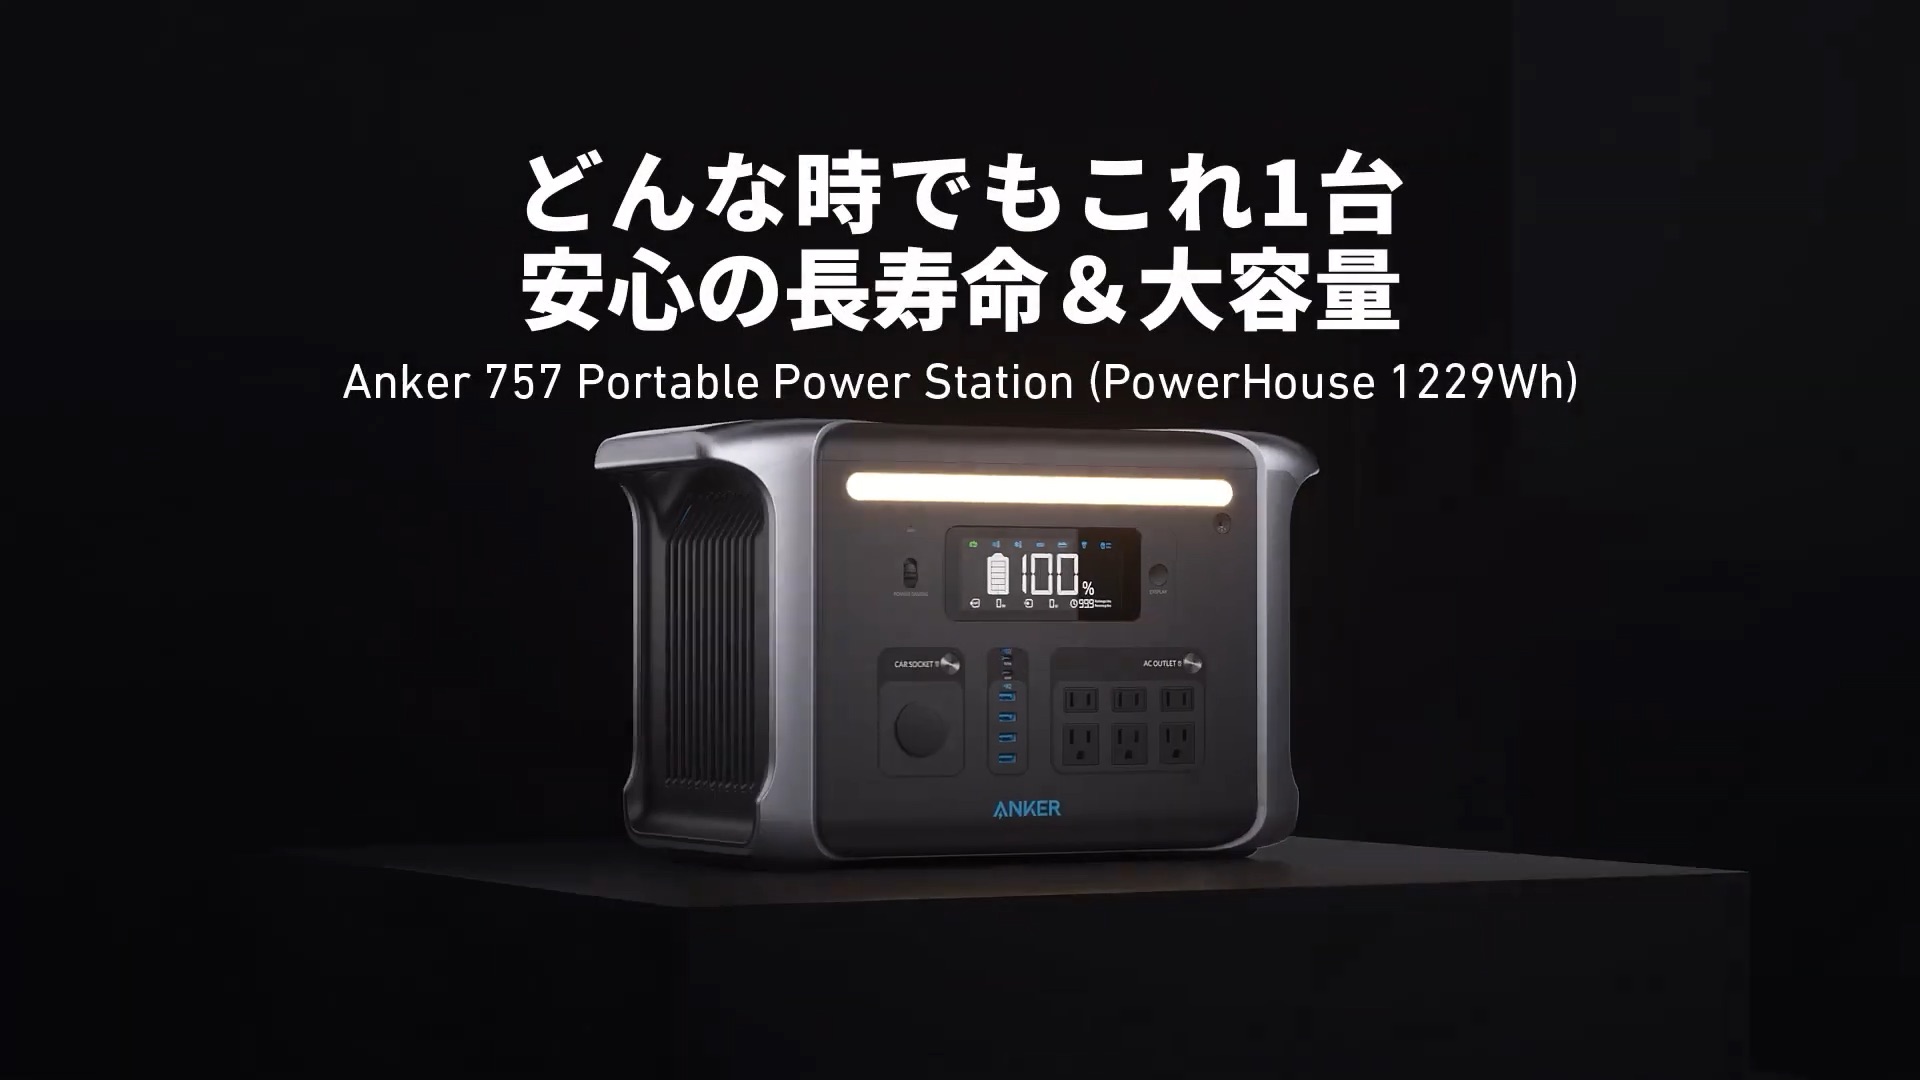 Anker 757 Portable Power Station PowerHouse 1229Wh